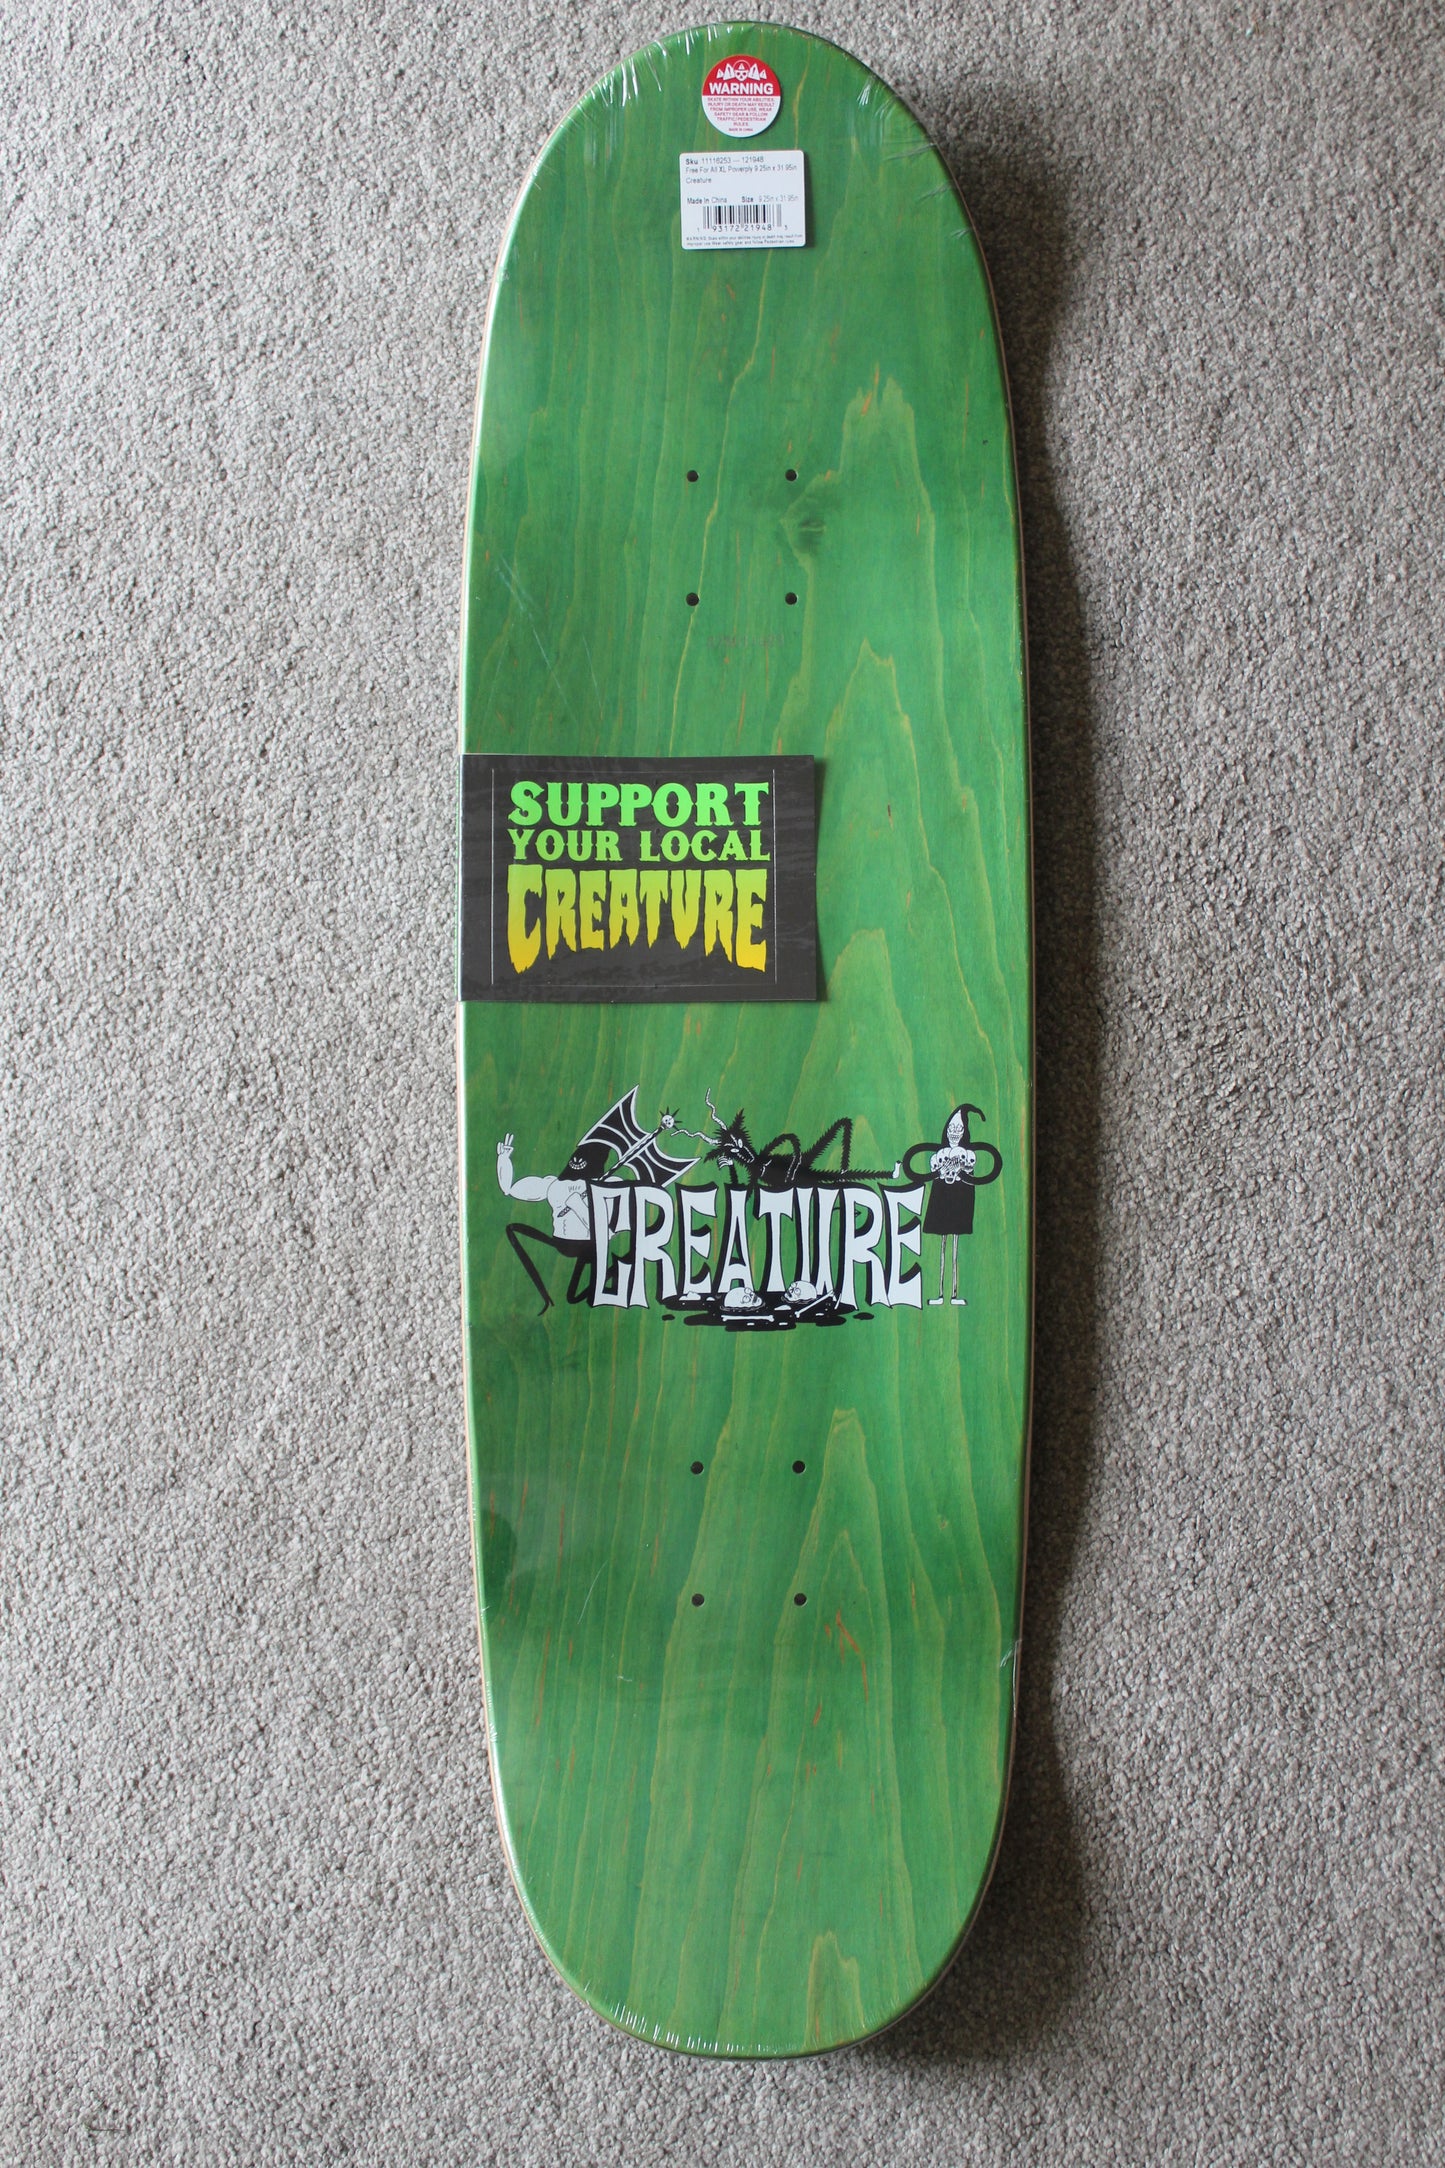 Creature 'Free for all' Power Ply 9.25 Skateboard Deck